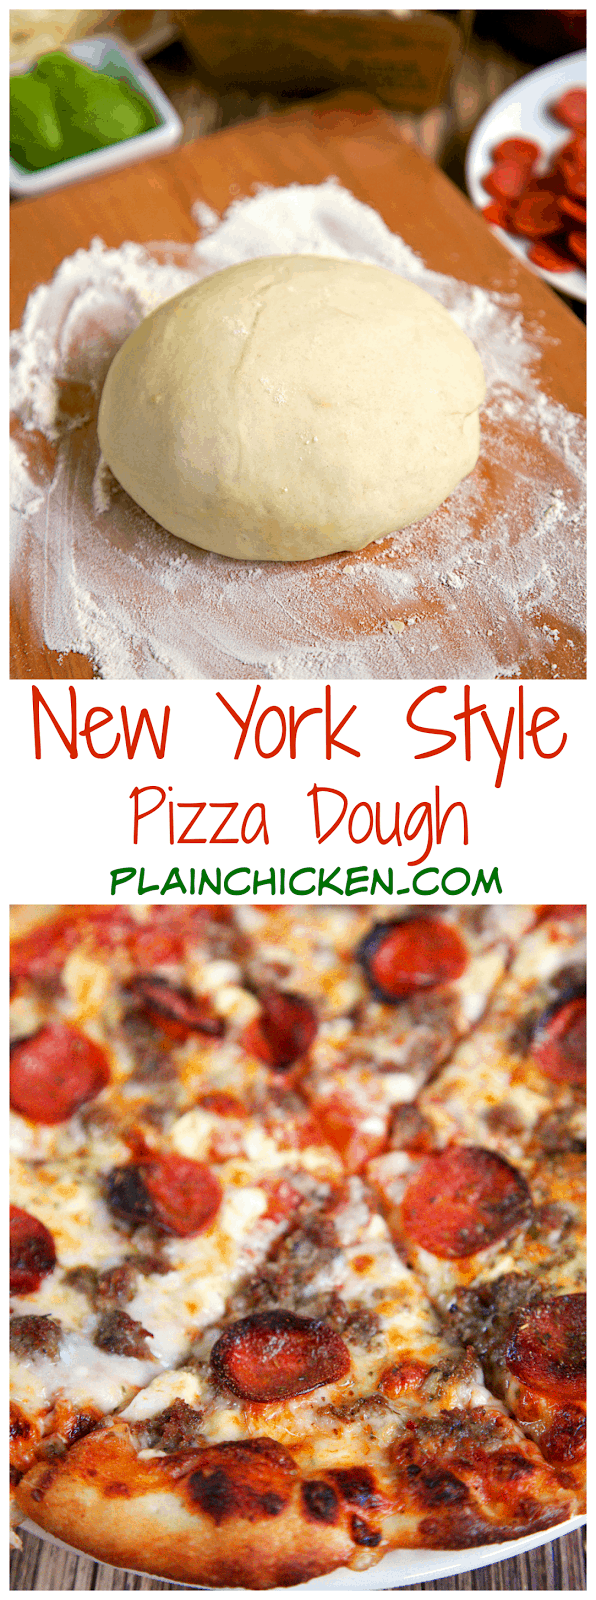 New York Style Pizza Dough Recipe - only 4 ingredients to make the best pizza dough - this dough is so easy to work with! Make the dough and refrigerate until ready to use. Can make up to 3 or 4 days in advance.